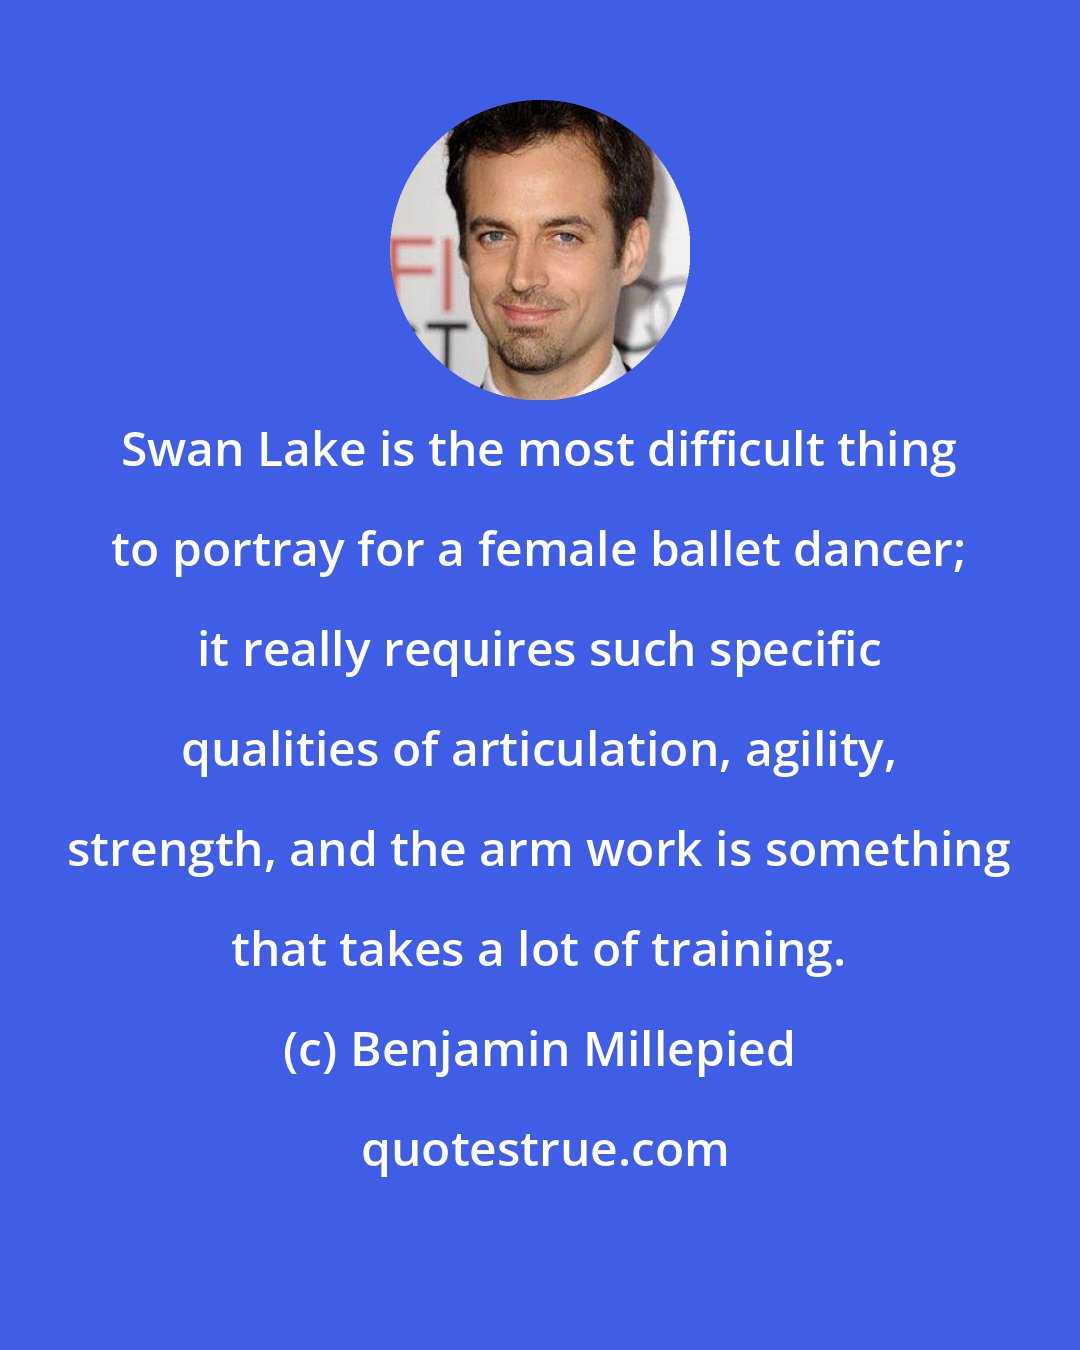 Benjamin Millepied: Swan Lake is the most difficult thing to portray for a female ballet dancer; it really requires such specific qualities of articulation, agility, strength, and the arm work is something that takes a lot of training.